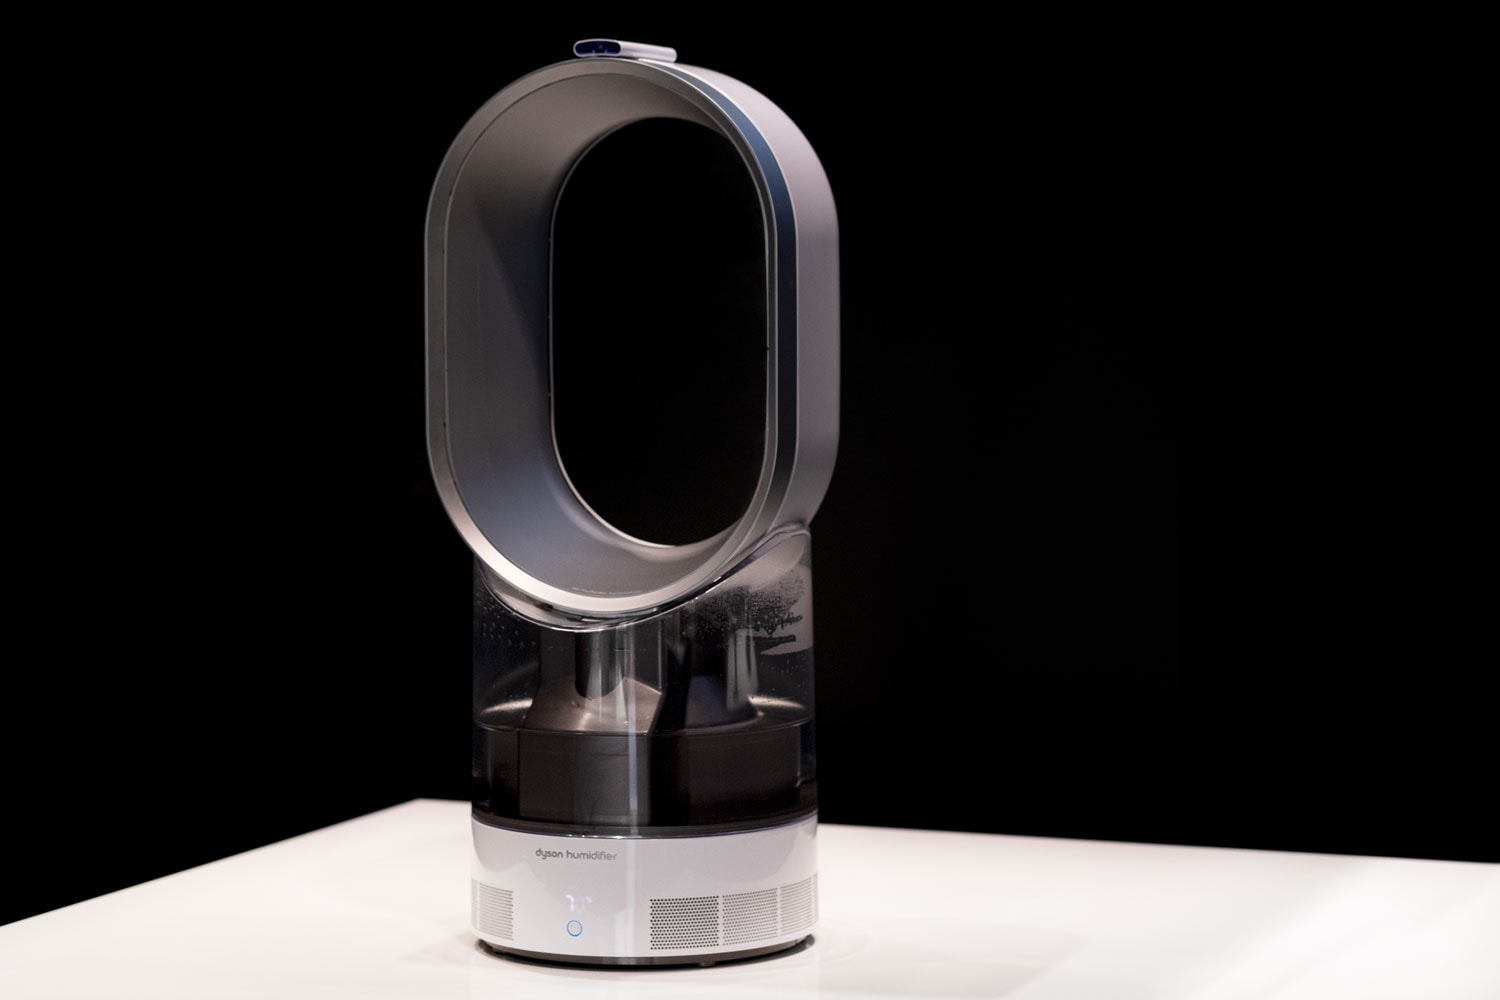 A gray Dyson humidifier at a Dyson appliance showroom